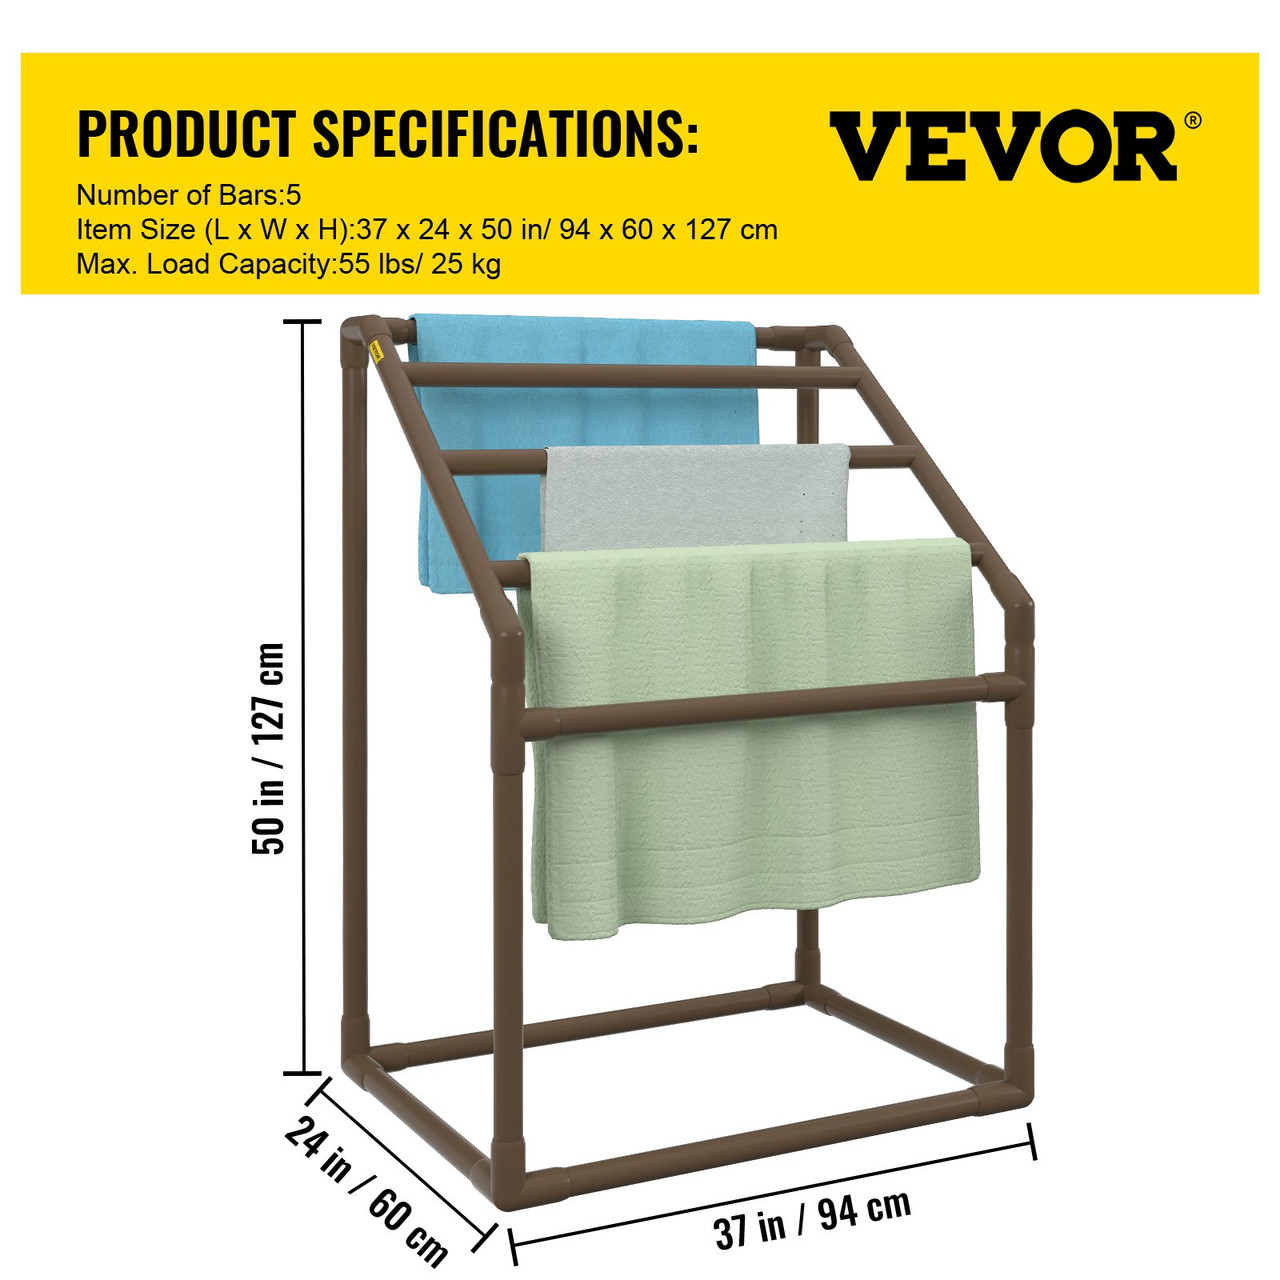 Pool Towel Rack, 5 Bar, Brown, Freestanding Outdoor PVC Trapedozal Poolside Storage Organizer, Include 8 Towel Clips, Mesh Bag, Hook, Also Stores Floats and Paddles, for Beach, Swimming Pool